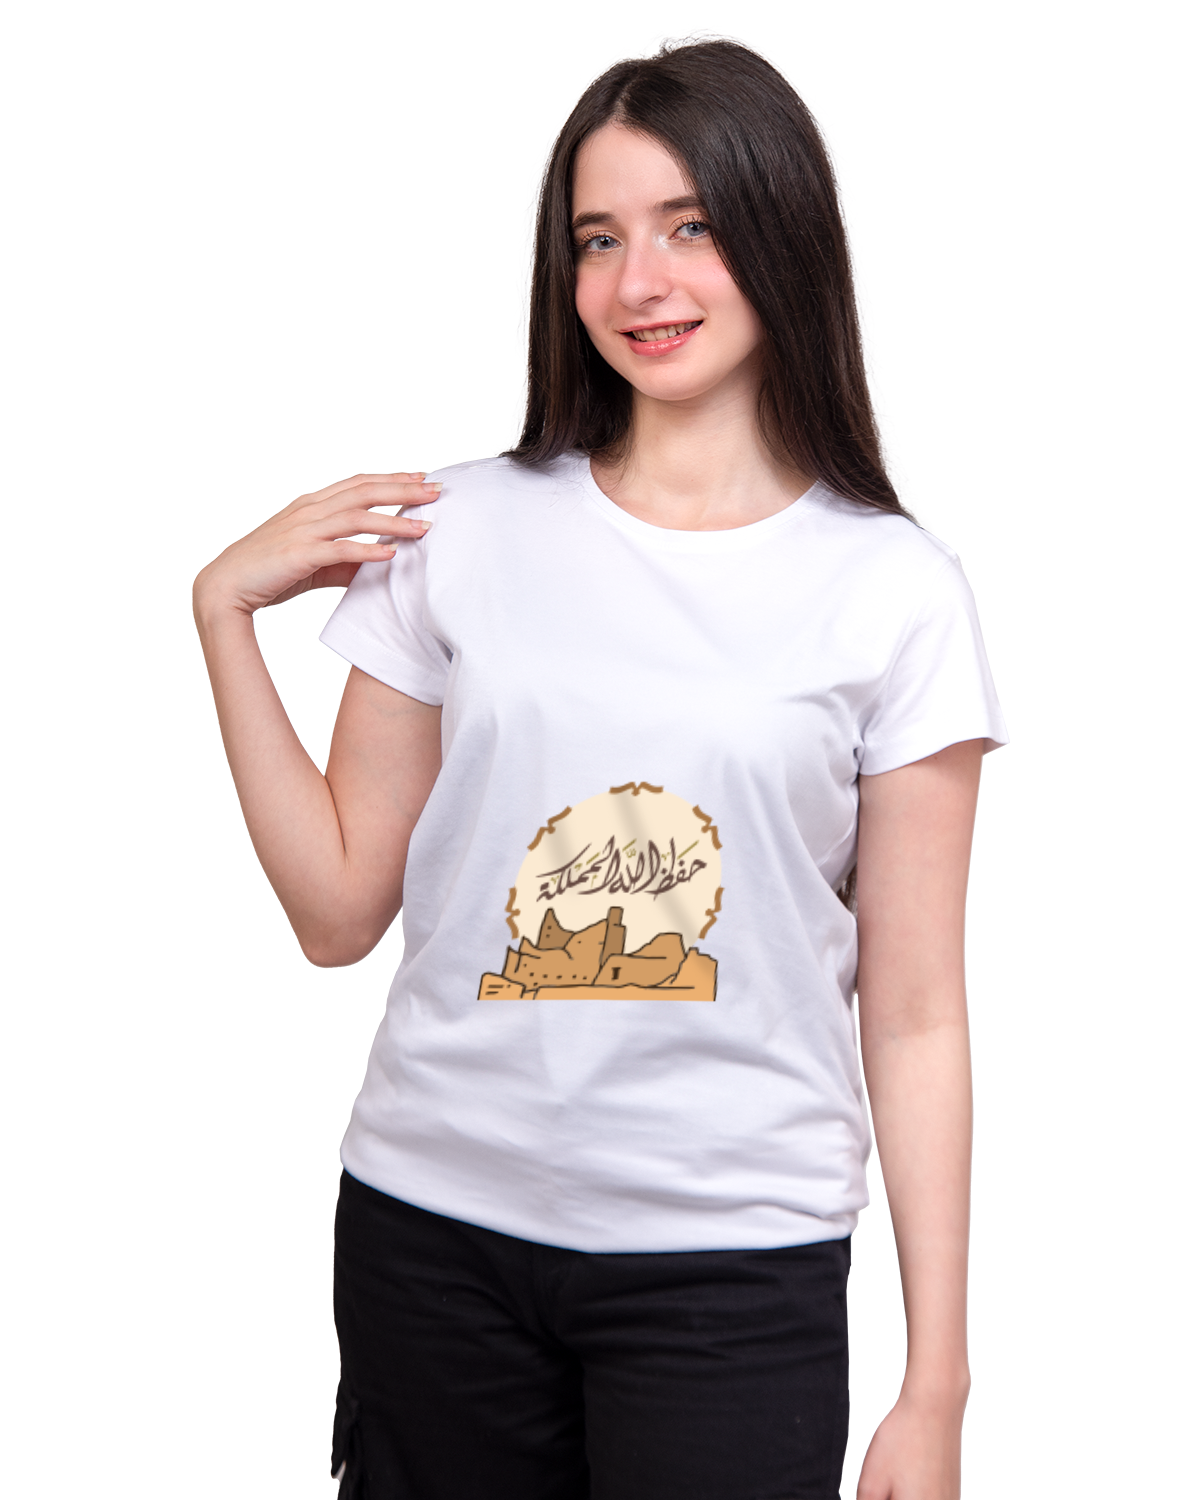 Women's Foundation Day T-shirt (May Allah Protect the Kingdom)